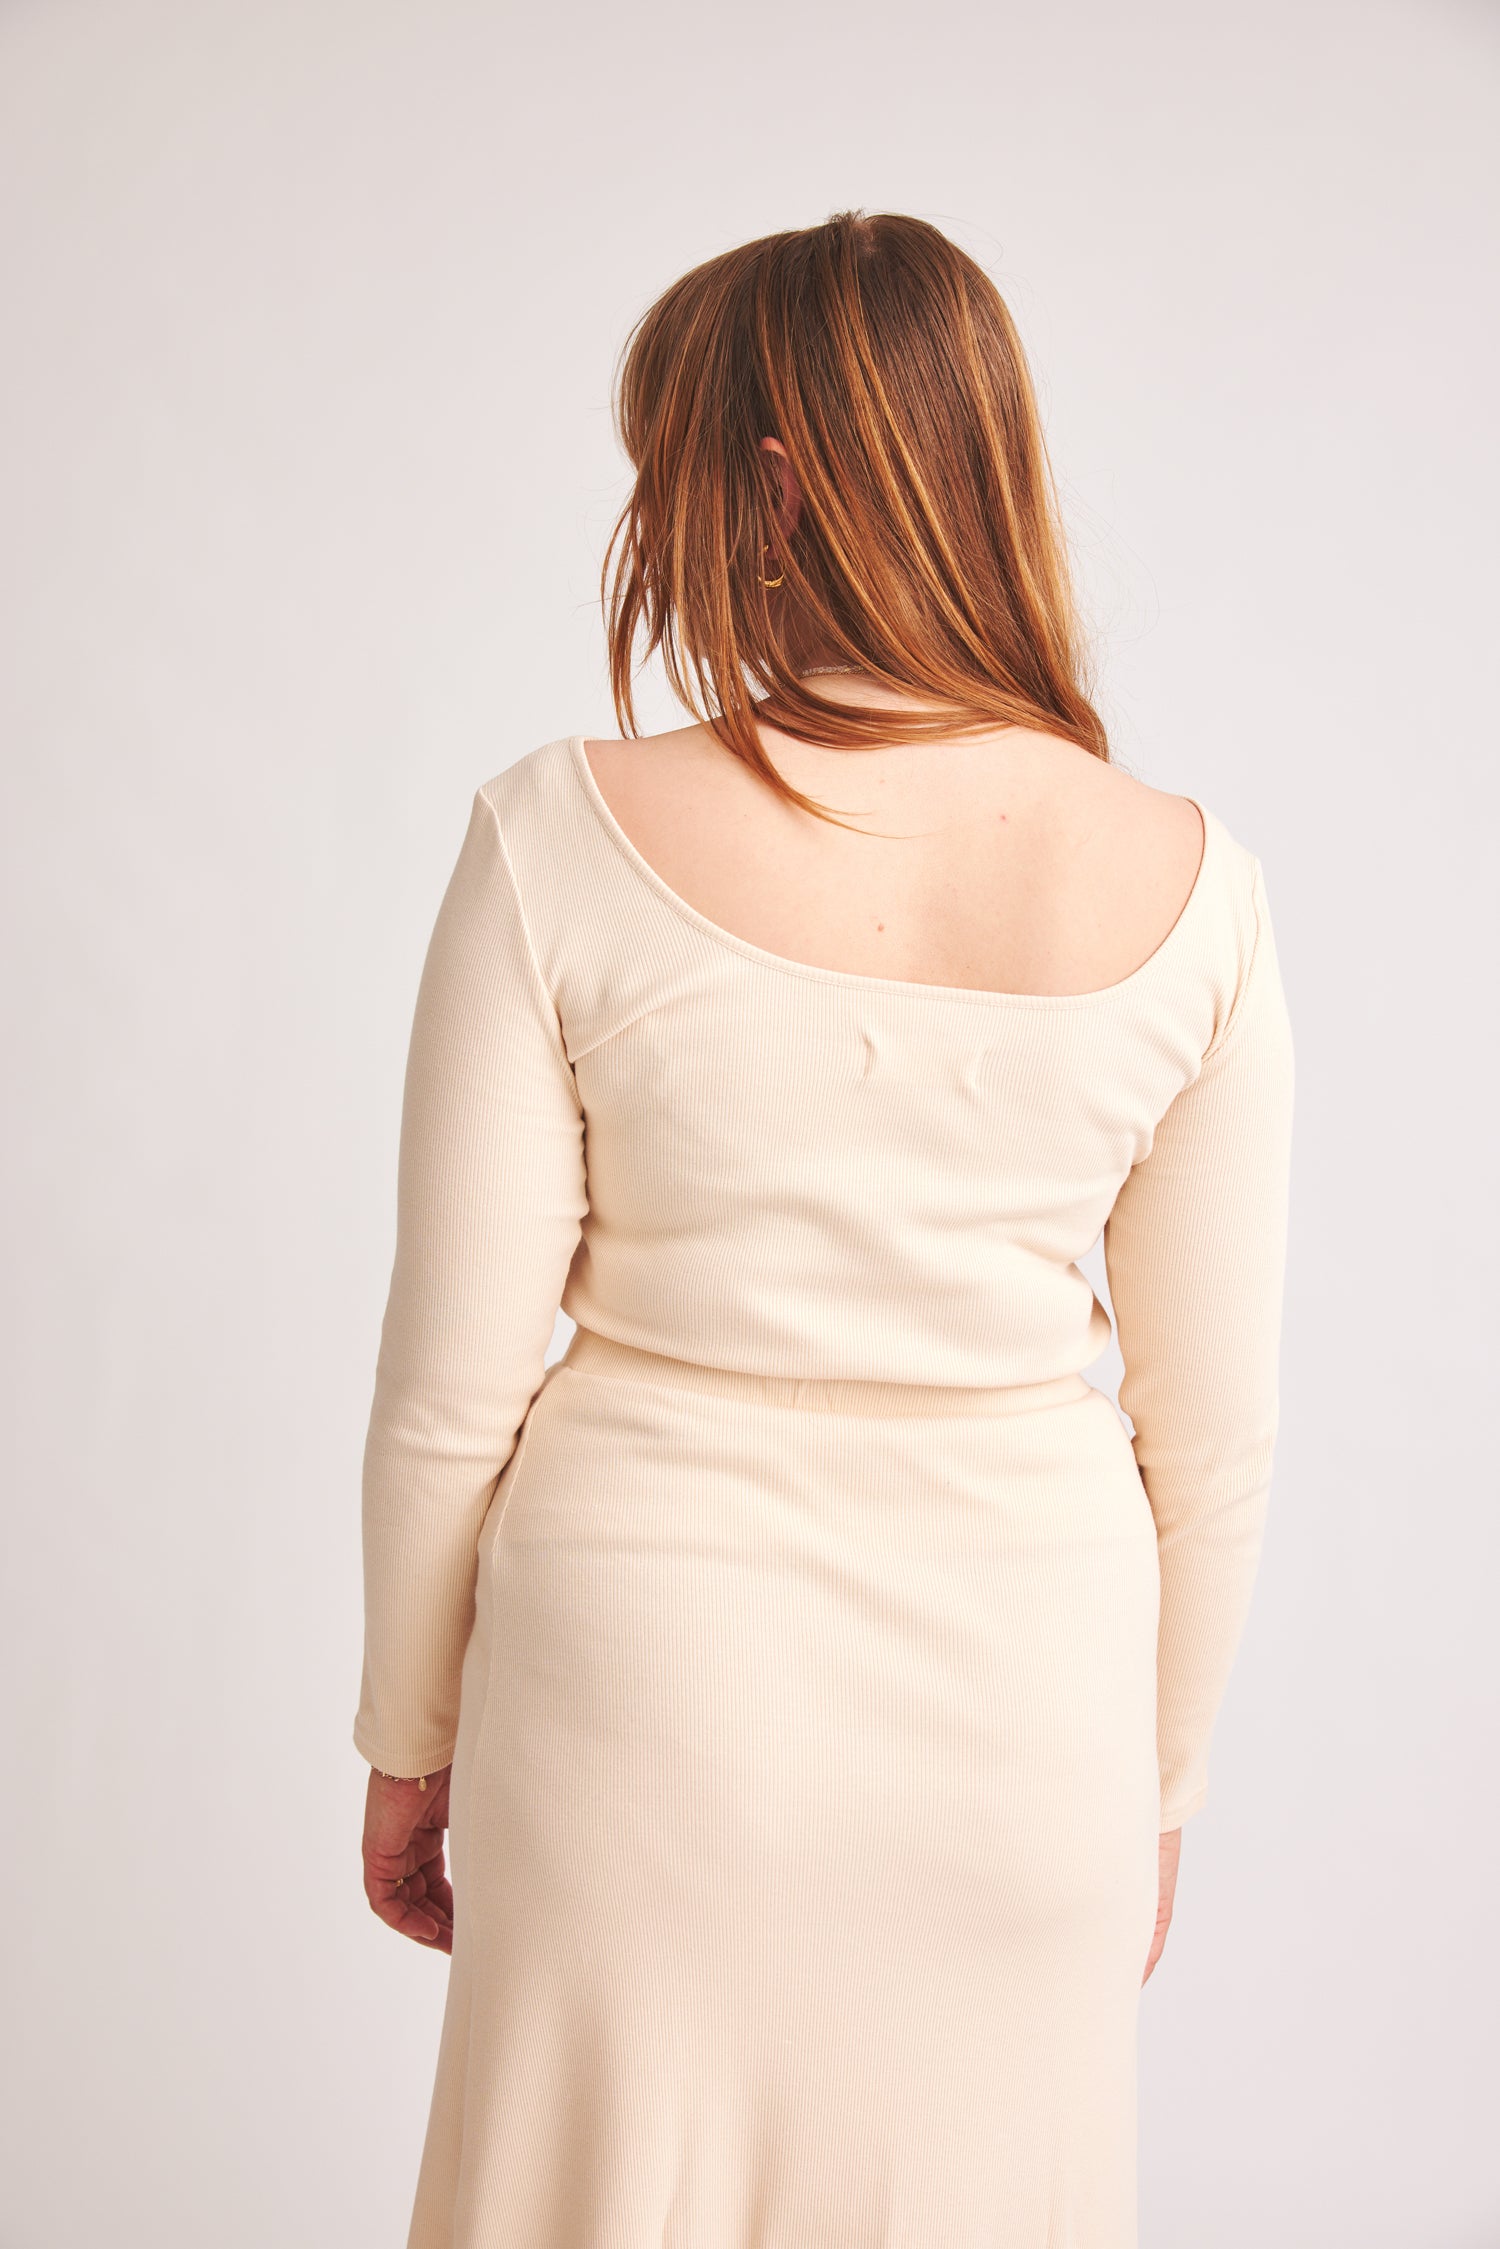 Natural-colored Beliz long-sleeved shirt made of organic cotton by Baige the Label